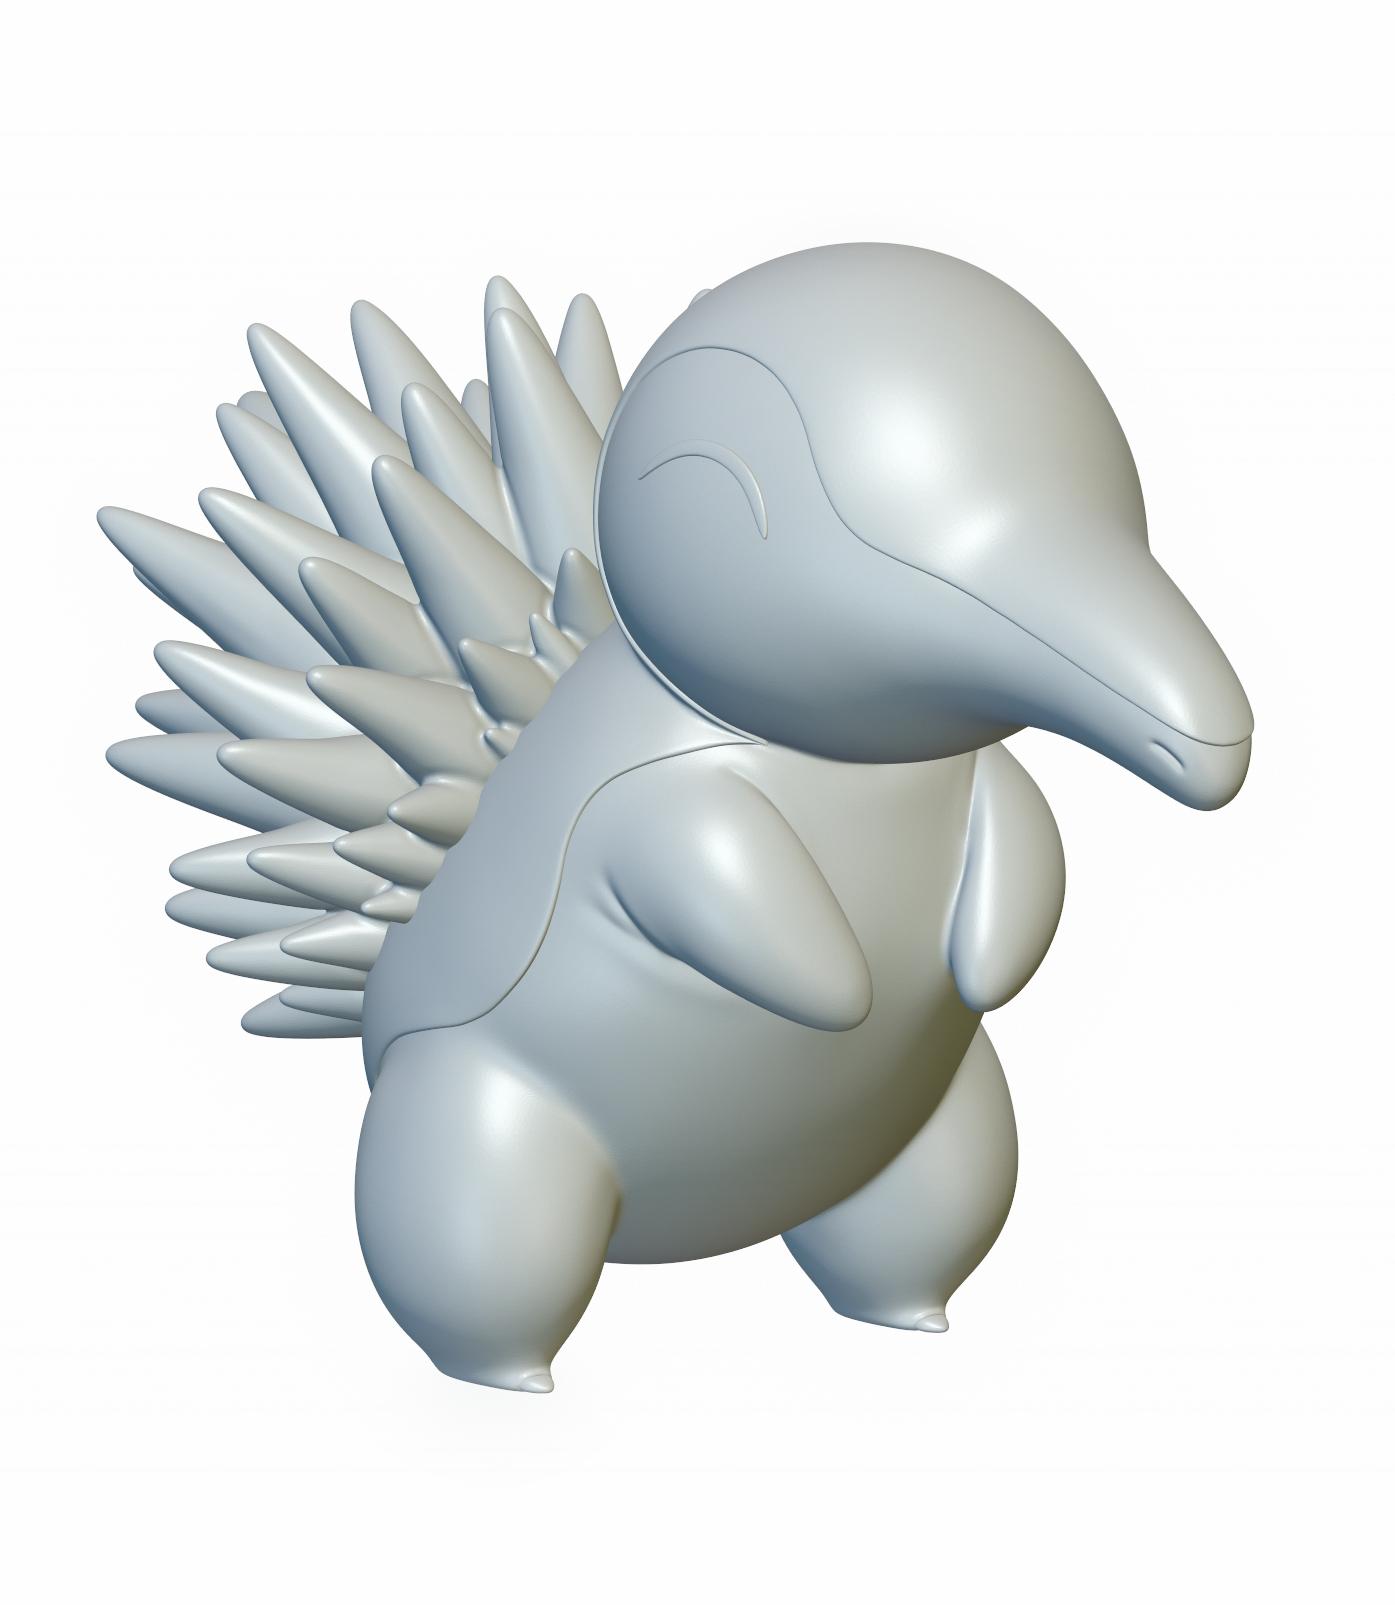 Pokemon Cyndaquil #155 - Optimized for 3D Printing 3d model